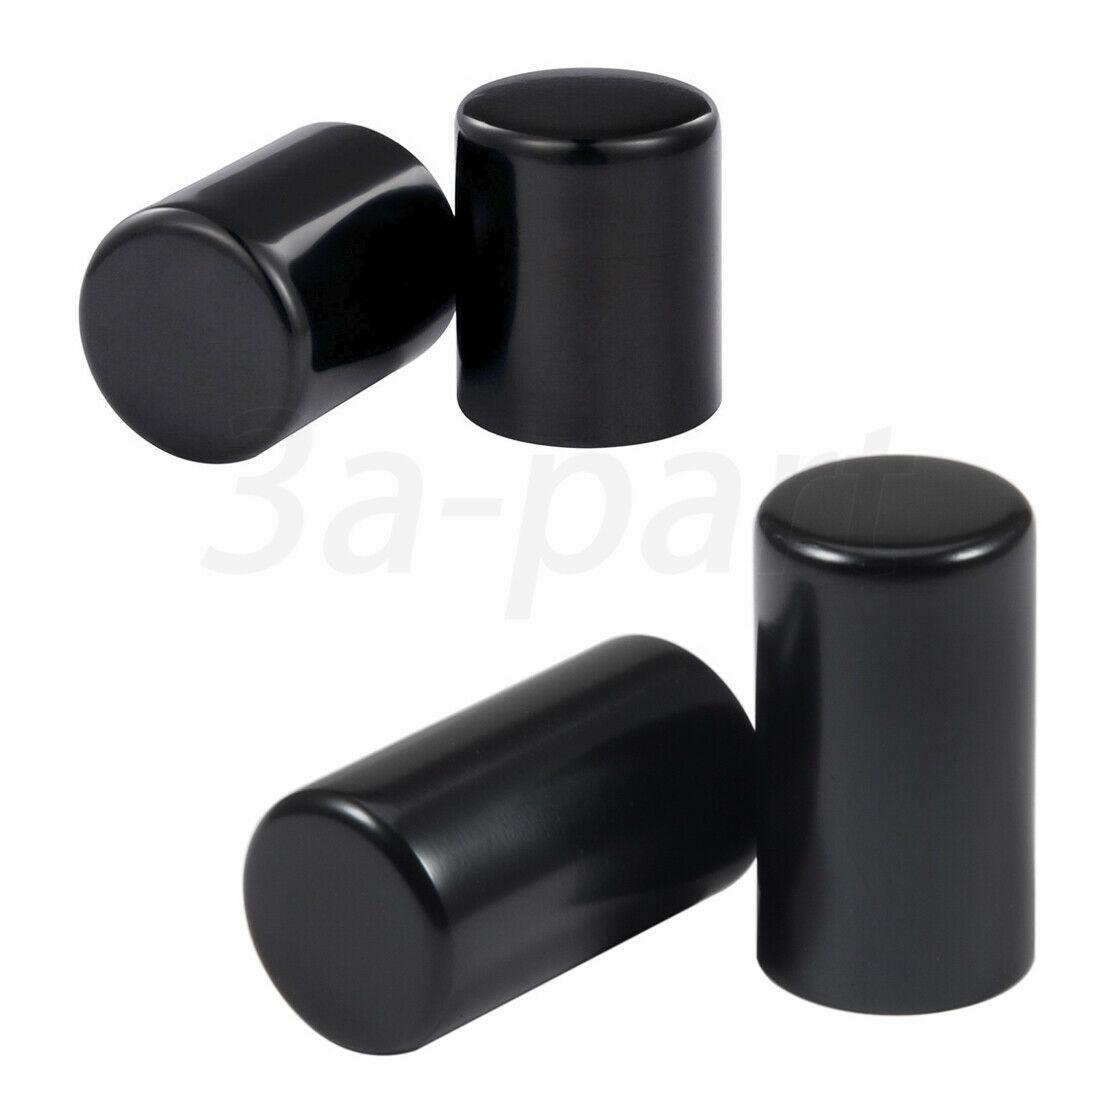 Black Docking Hardware Point Covers Kit Fit for Harley Touring Road King 2009-22 - Moto Life Products